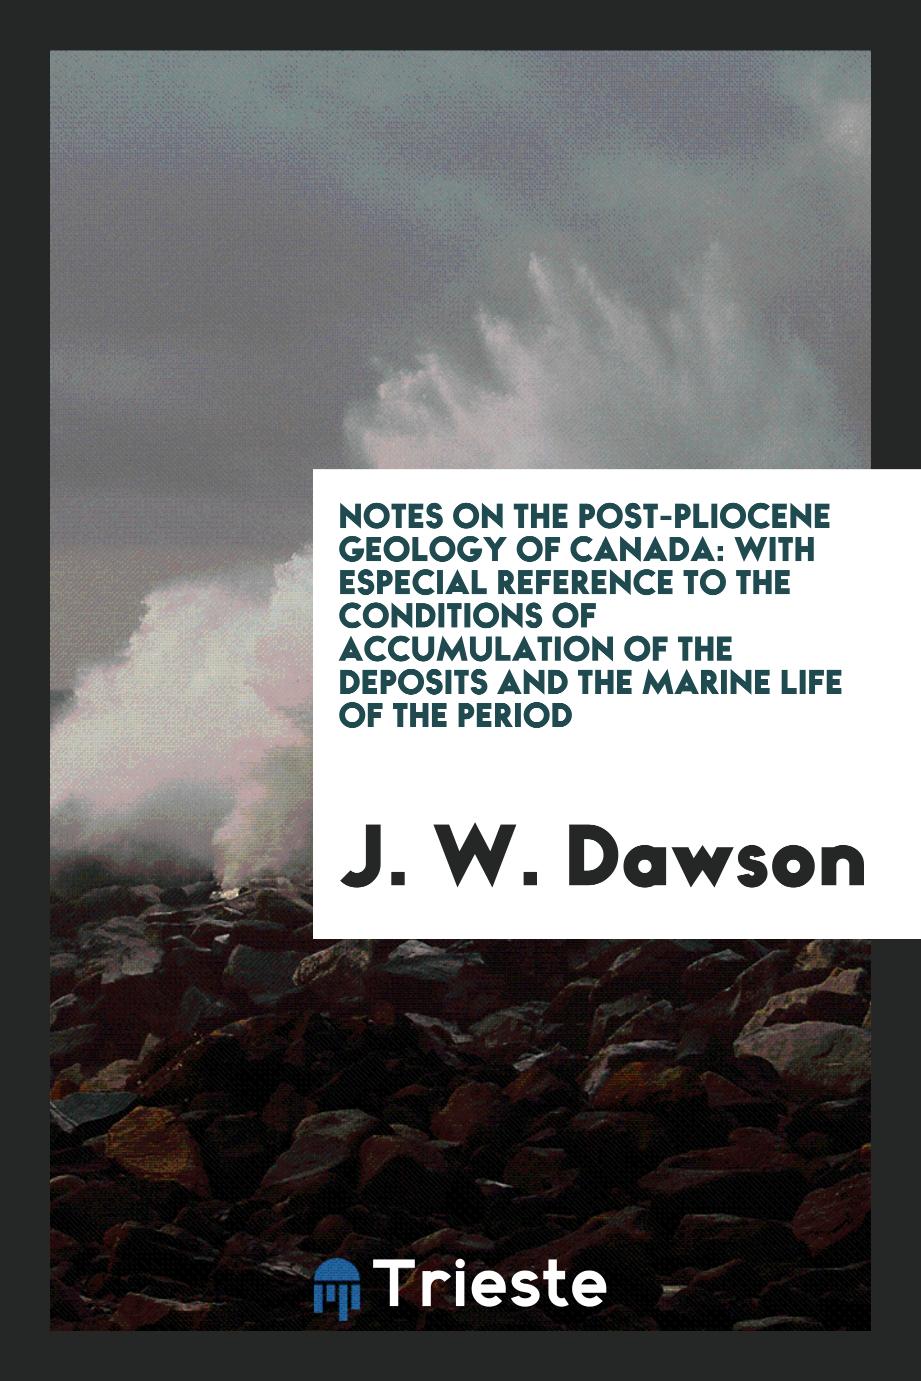 Notes on the Post-Pliocene Geology of Canada: With Especial Reference to the Conditions of Accumulation of the Deposits and the Marine Life of the Period